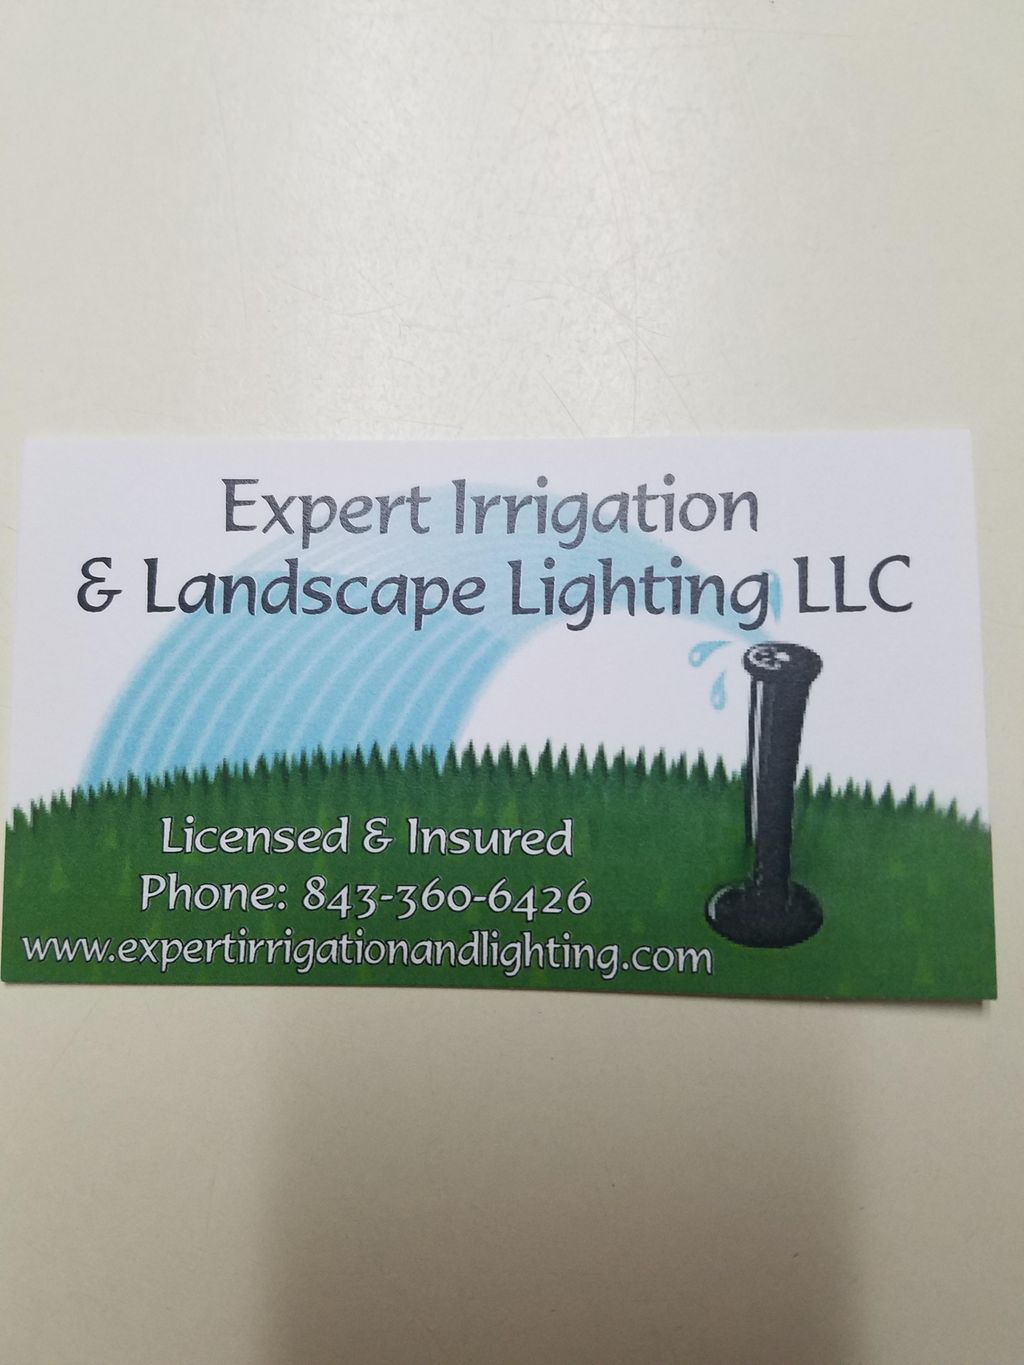 Expert Irrigation and Lighting and lawn maint llc